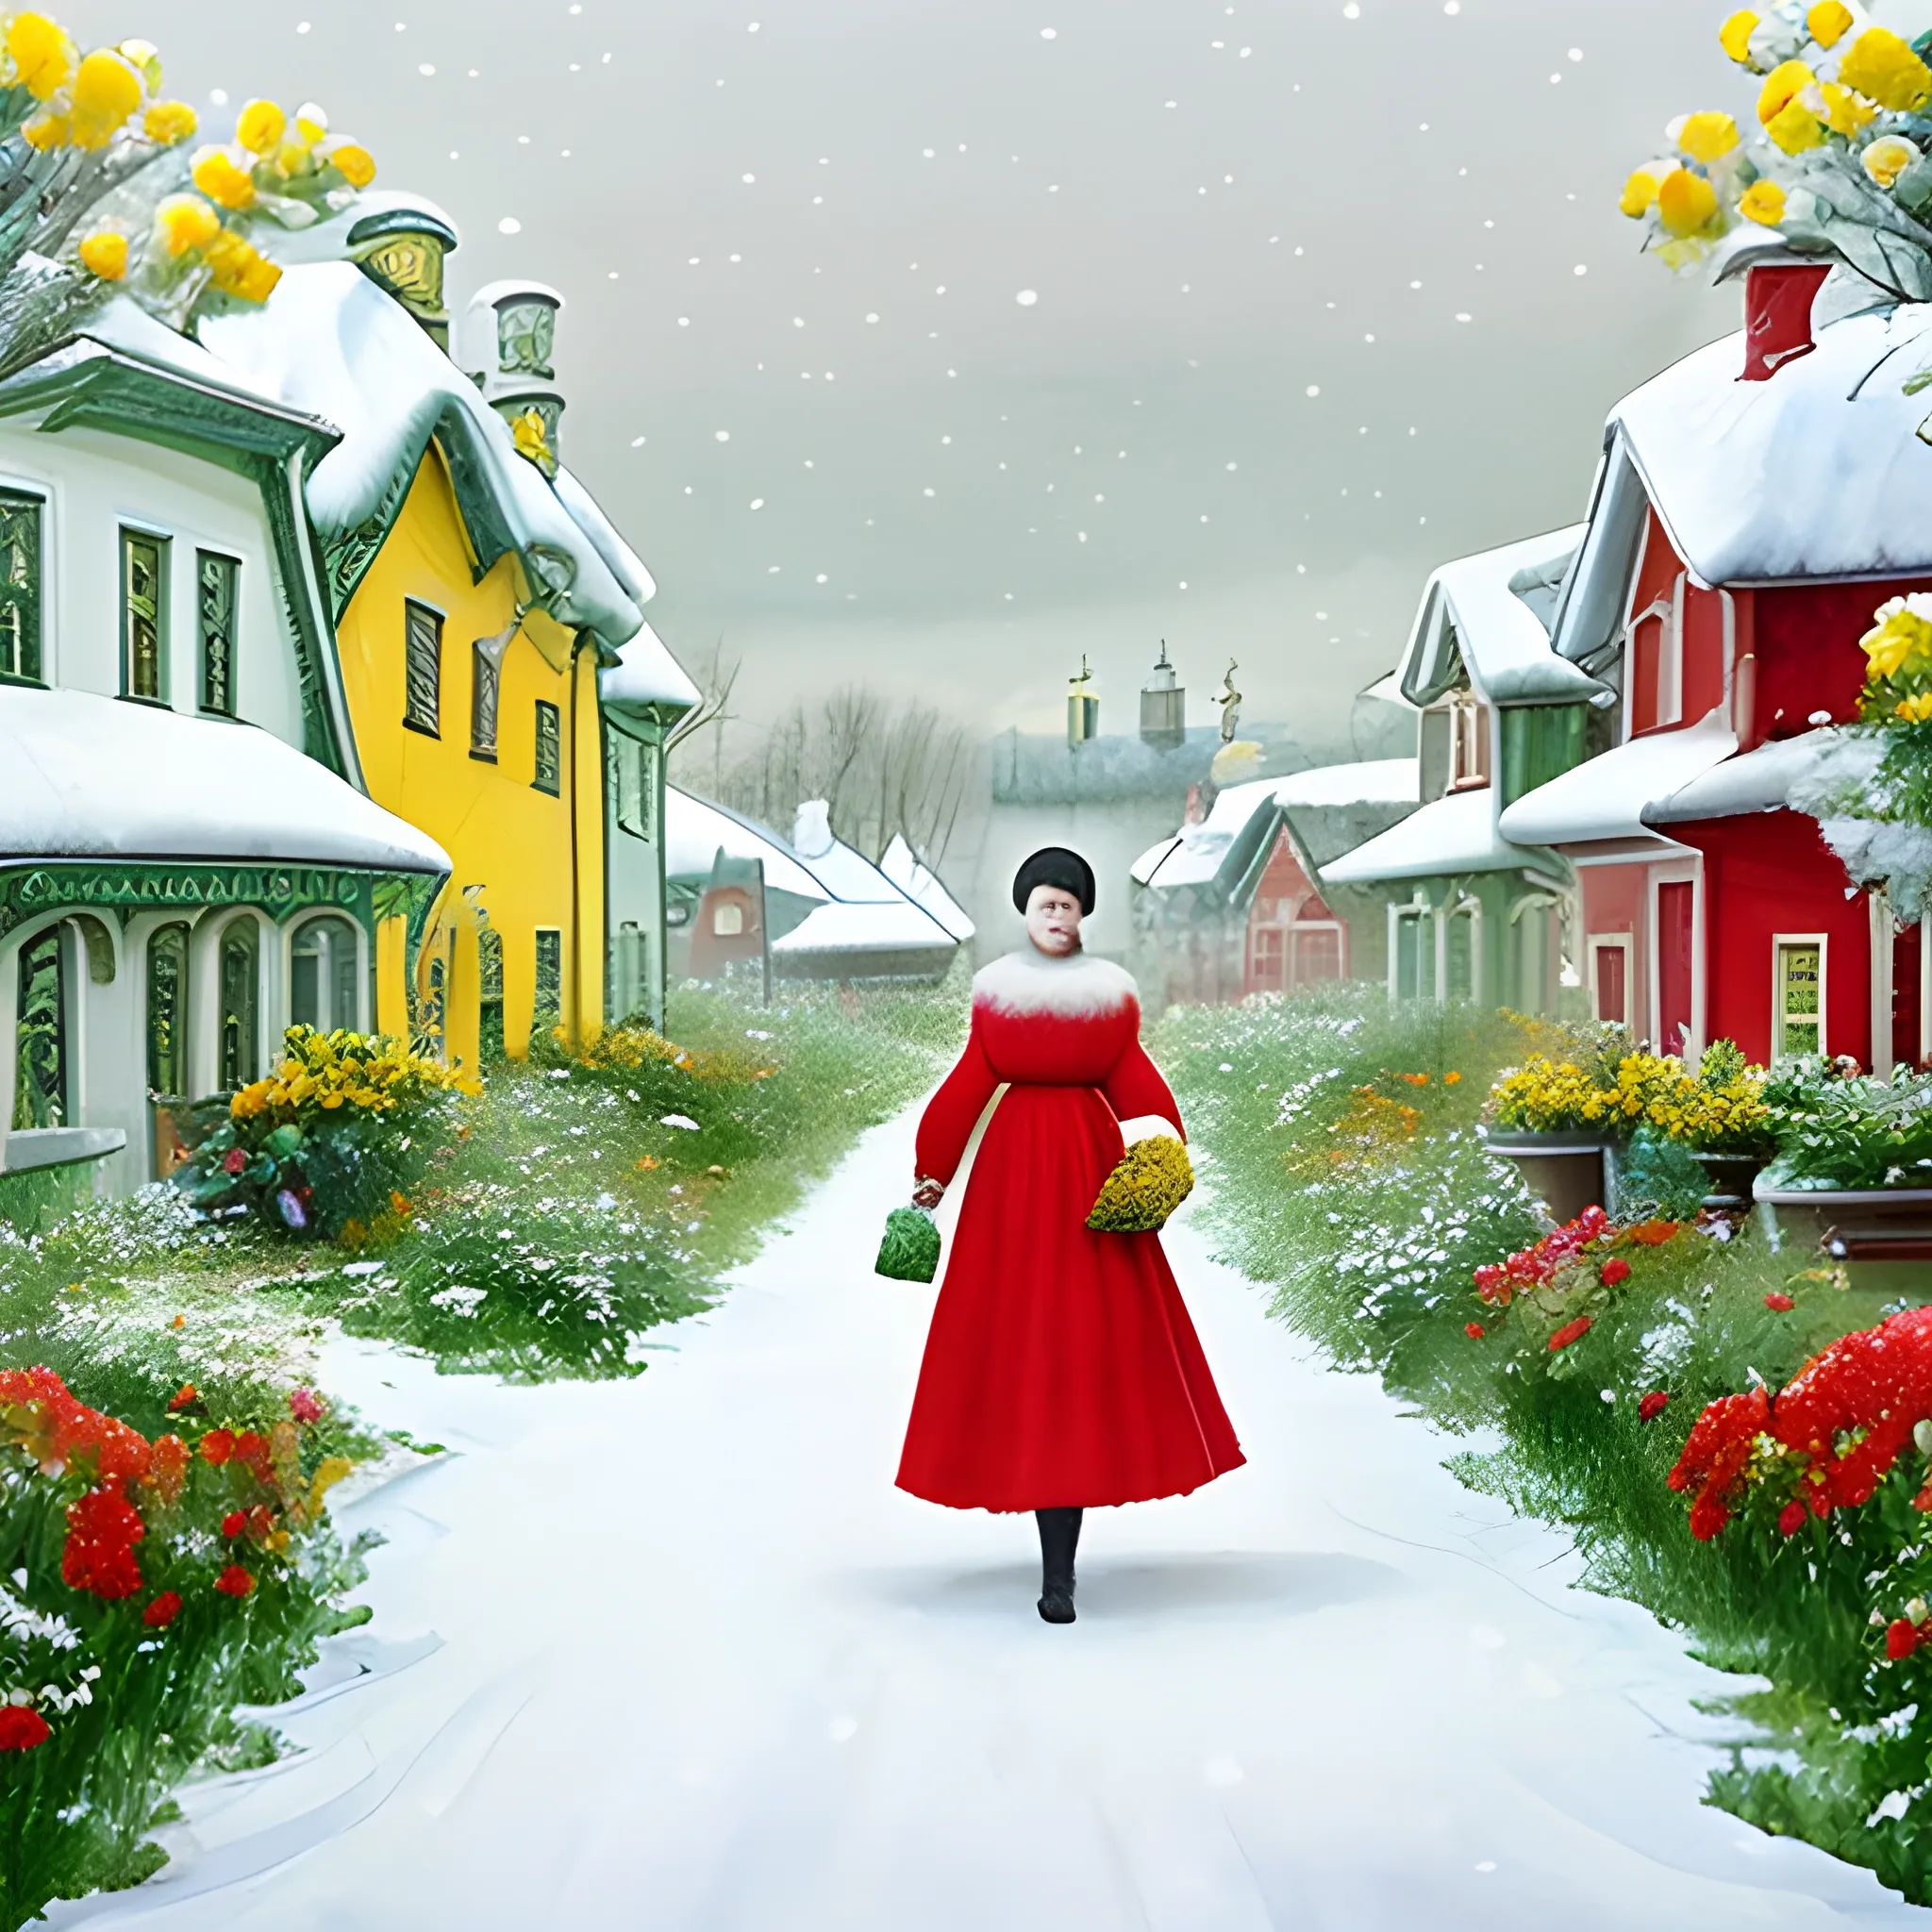 Russian landscape snowing, black-haired woman in the middle of the landscape holding a furry white cat, wearing a light red dress, old Russian-style houses in the background and the green floor with yellow flowers shows, , Water Color